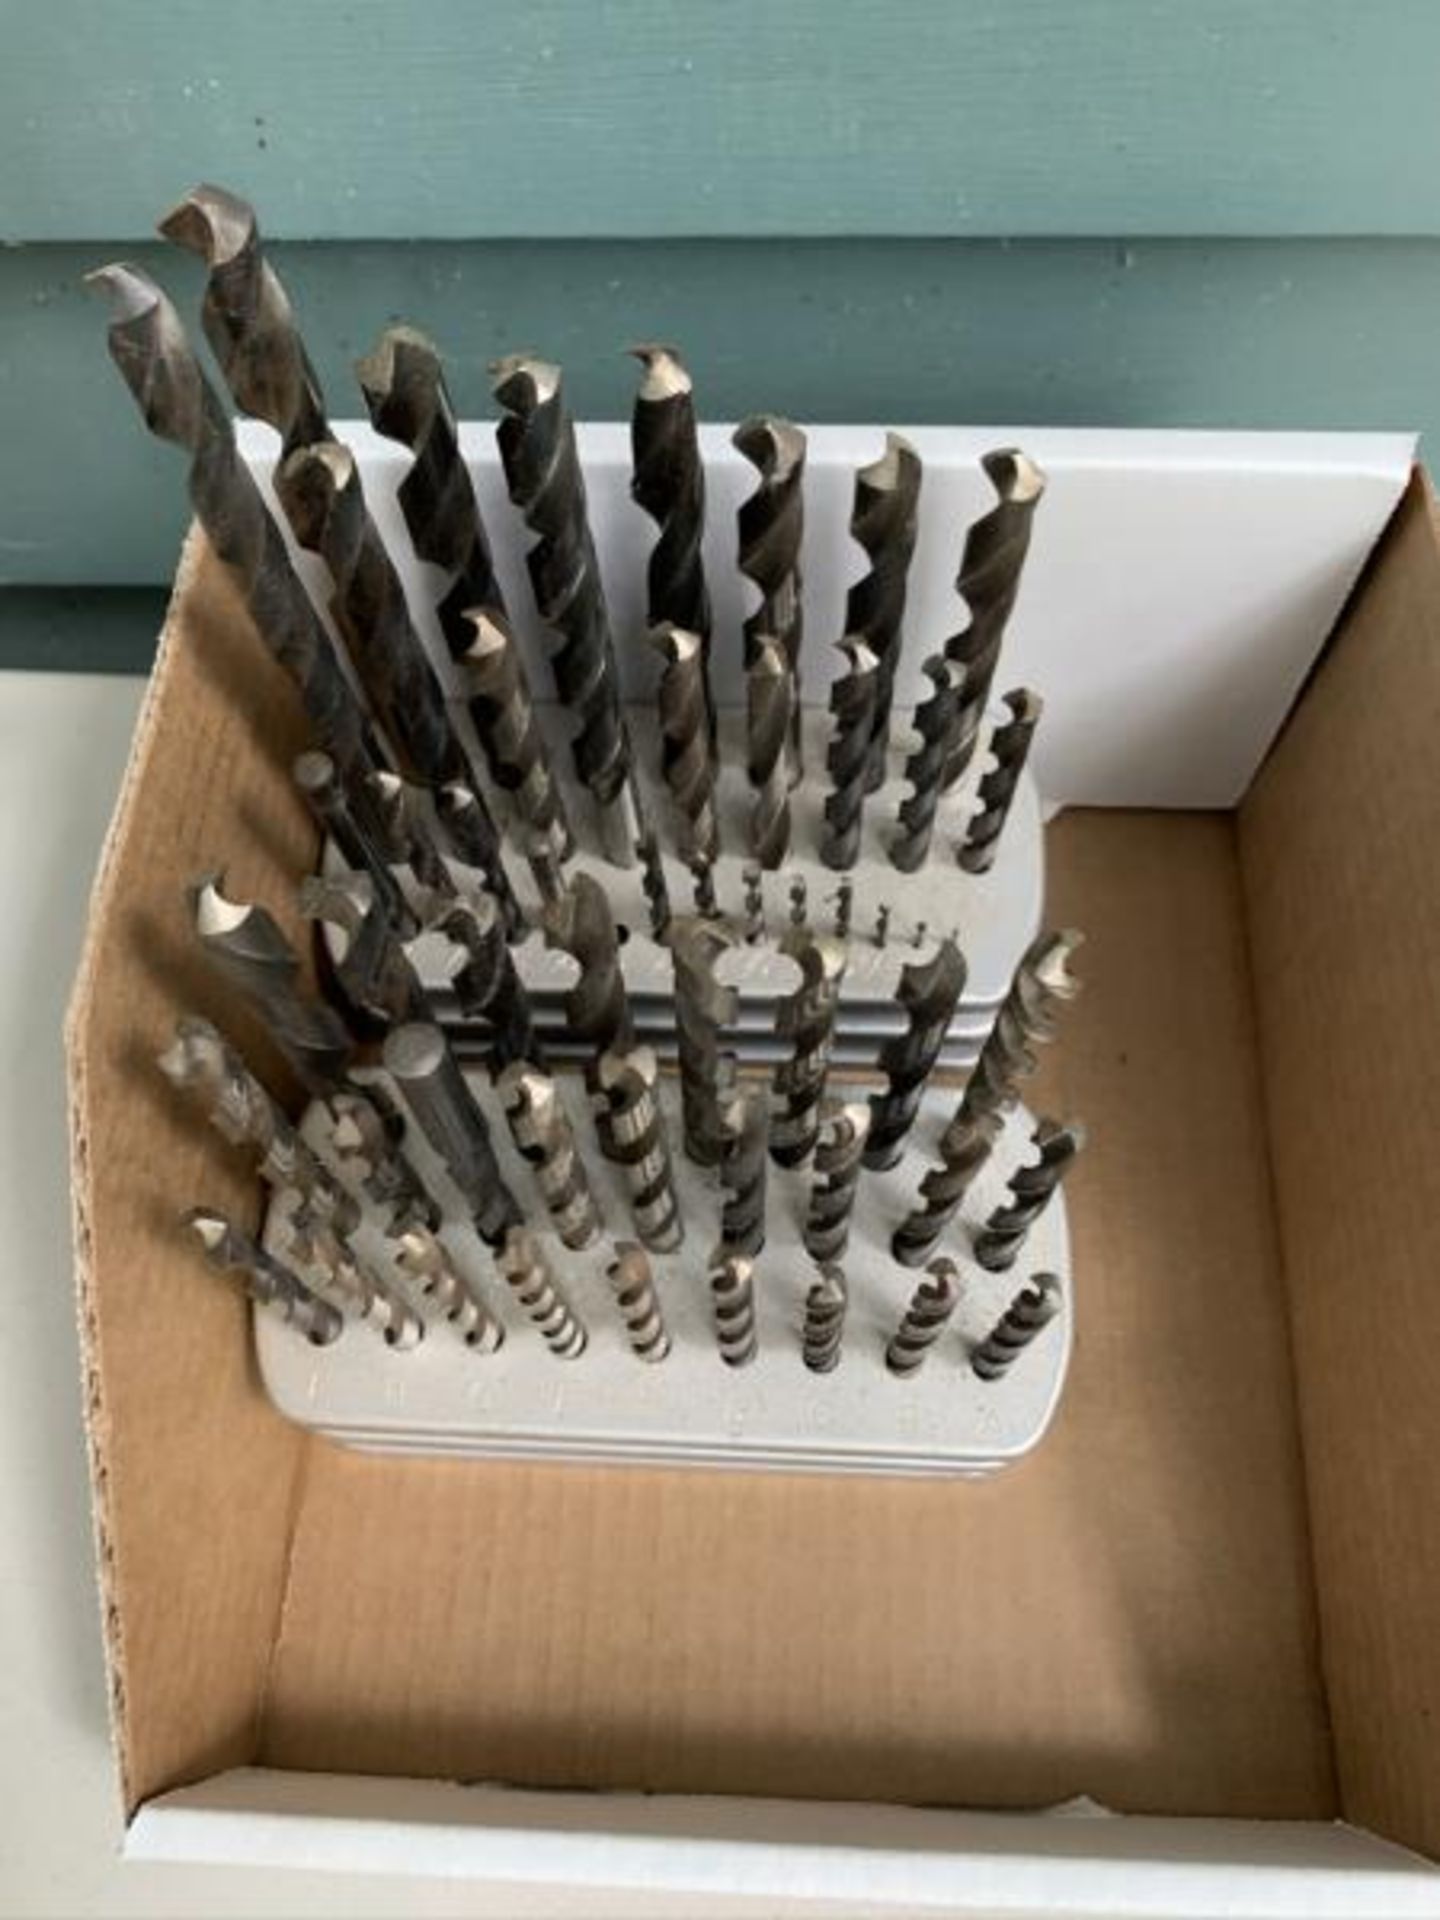 Set of Drill Bits - Image 2 of 2